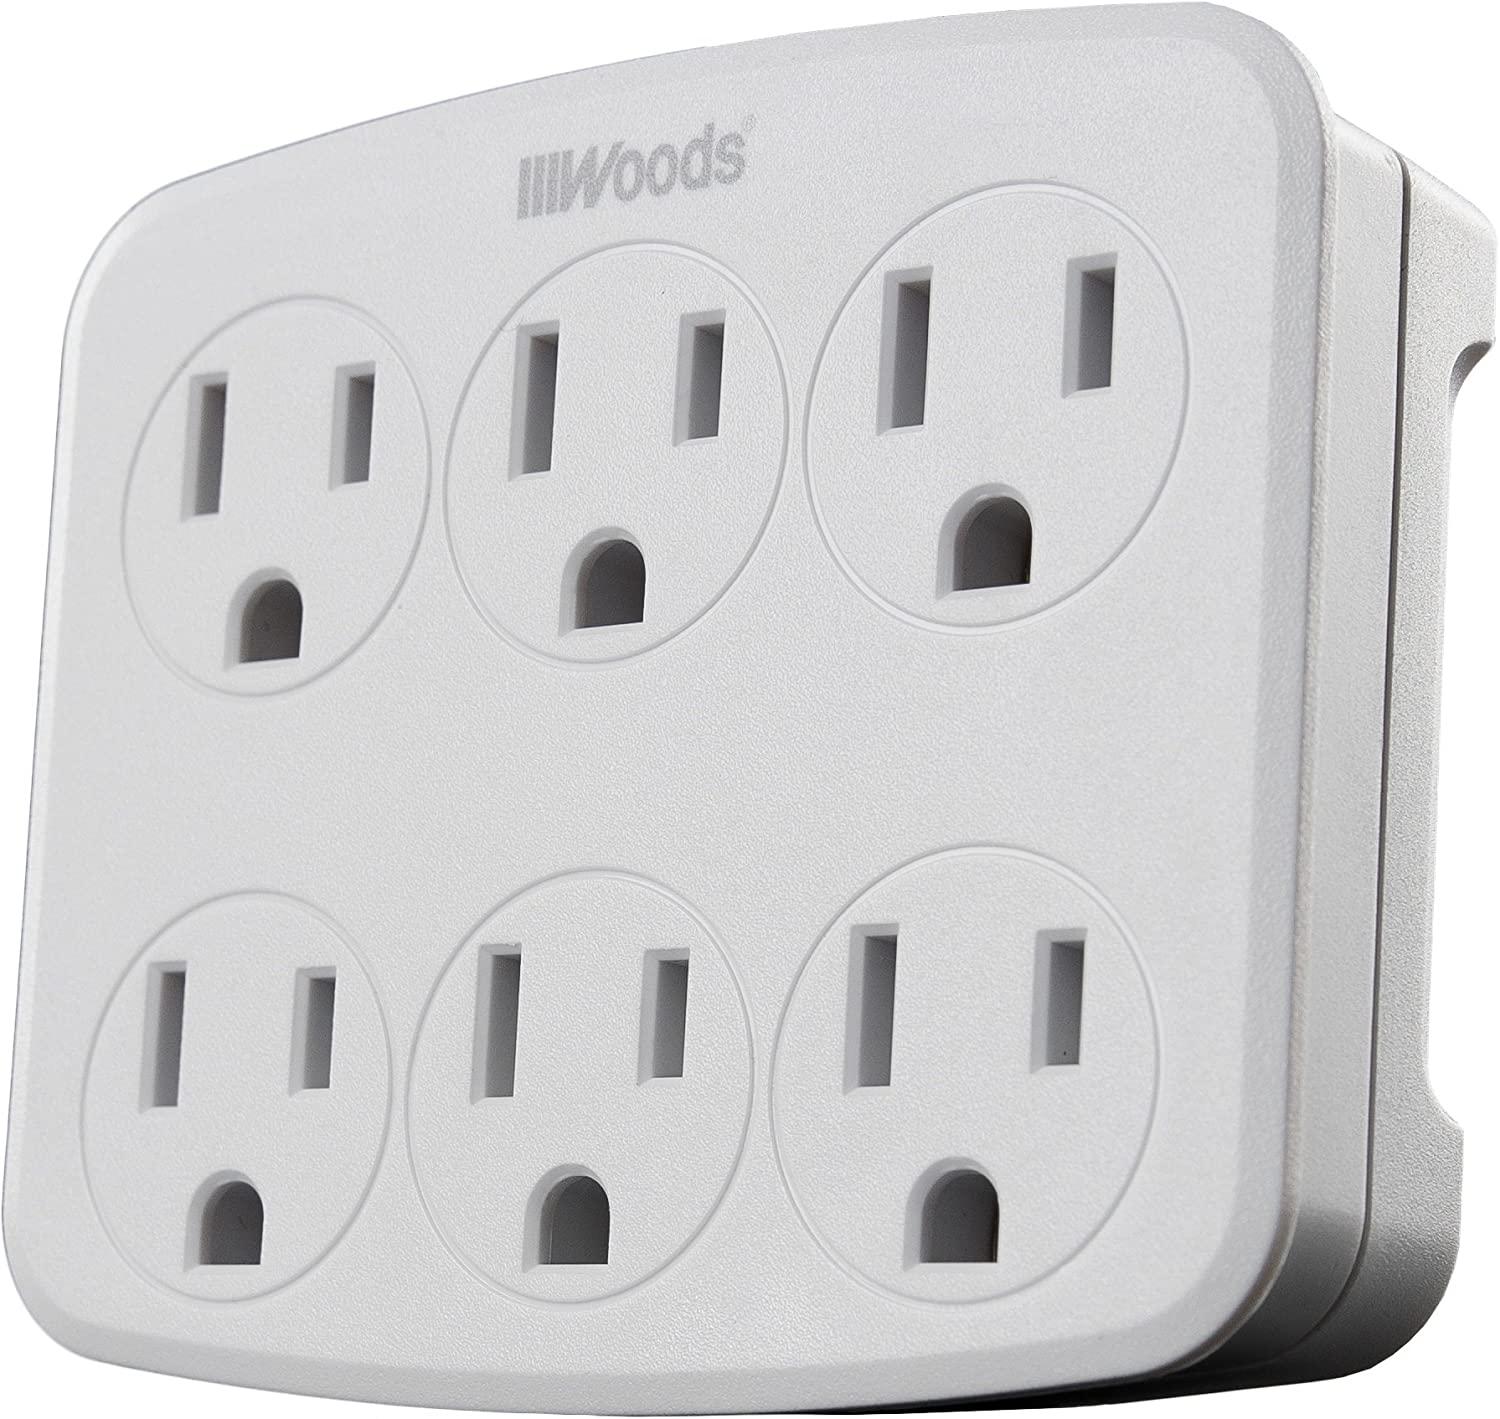 Woods 6-Outlet Wall Tap Adapter for $3.43